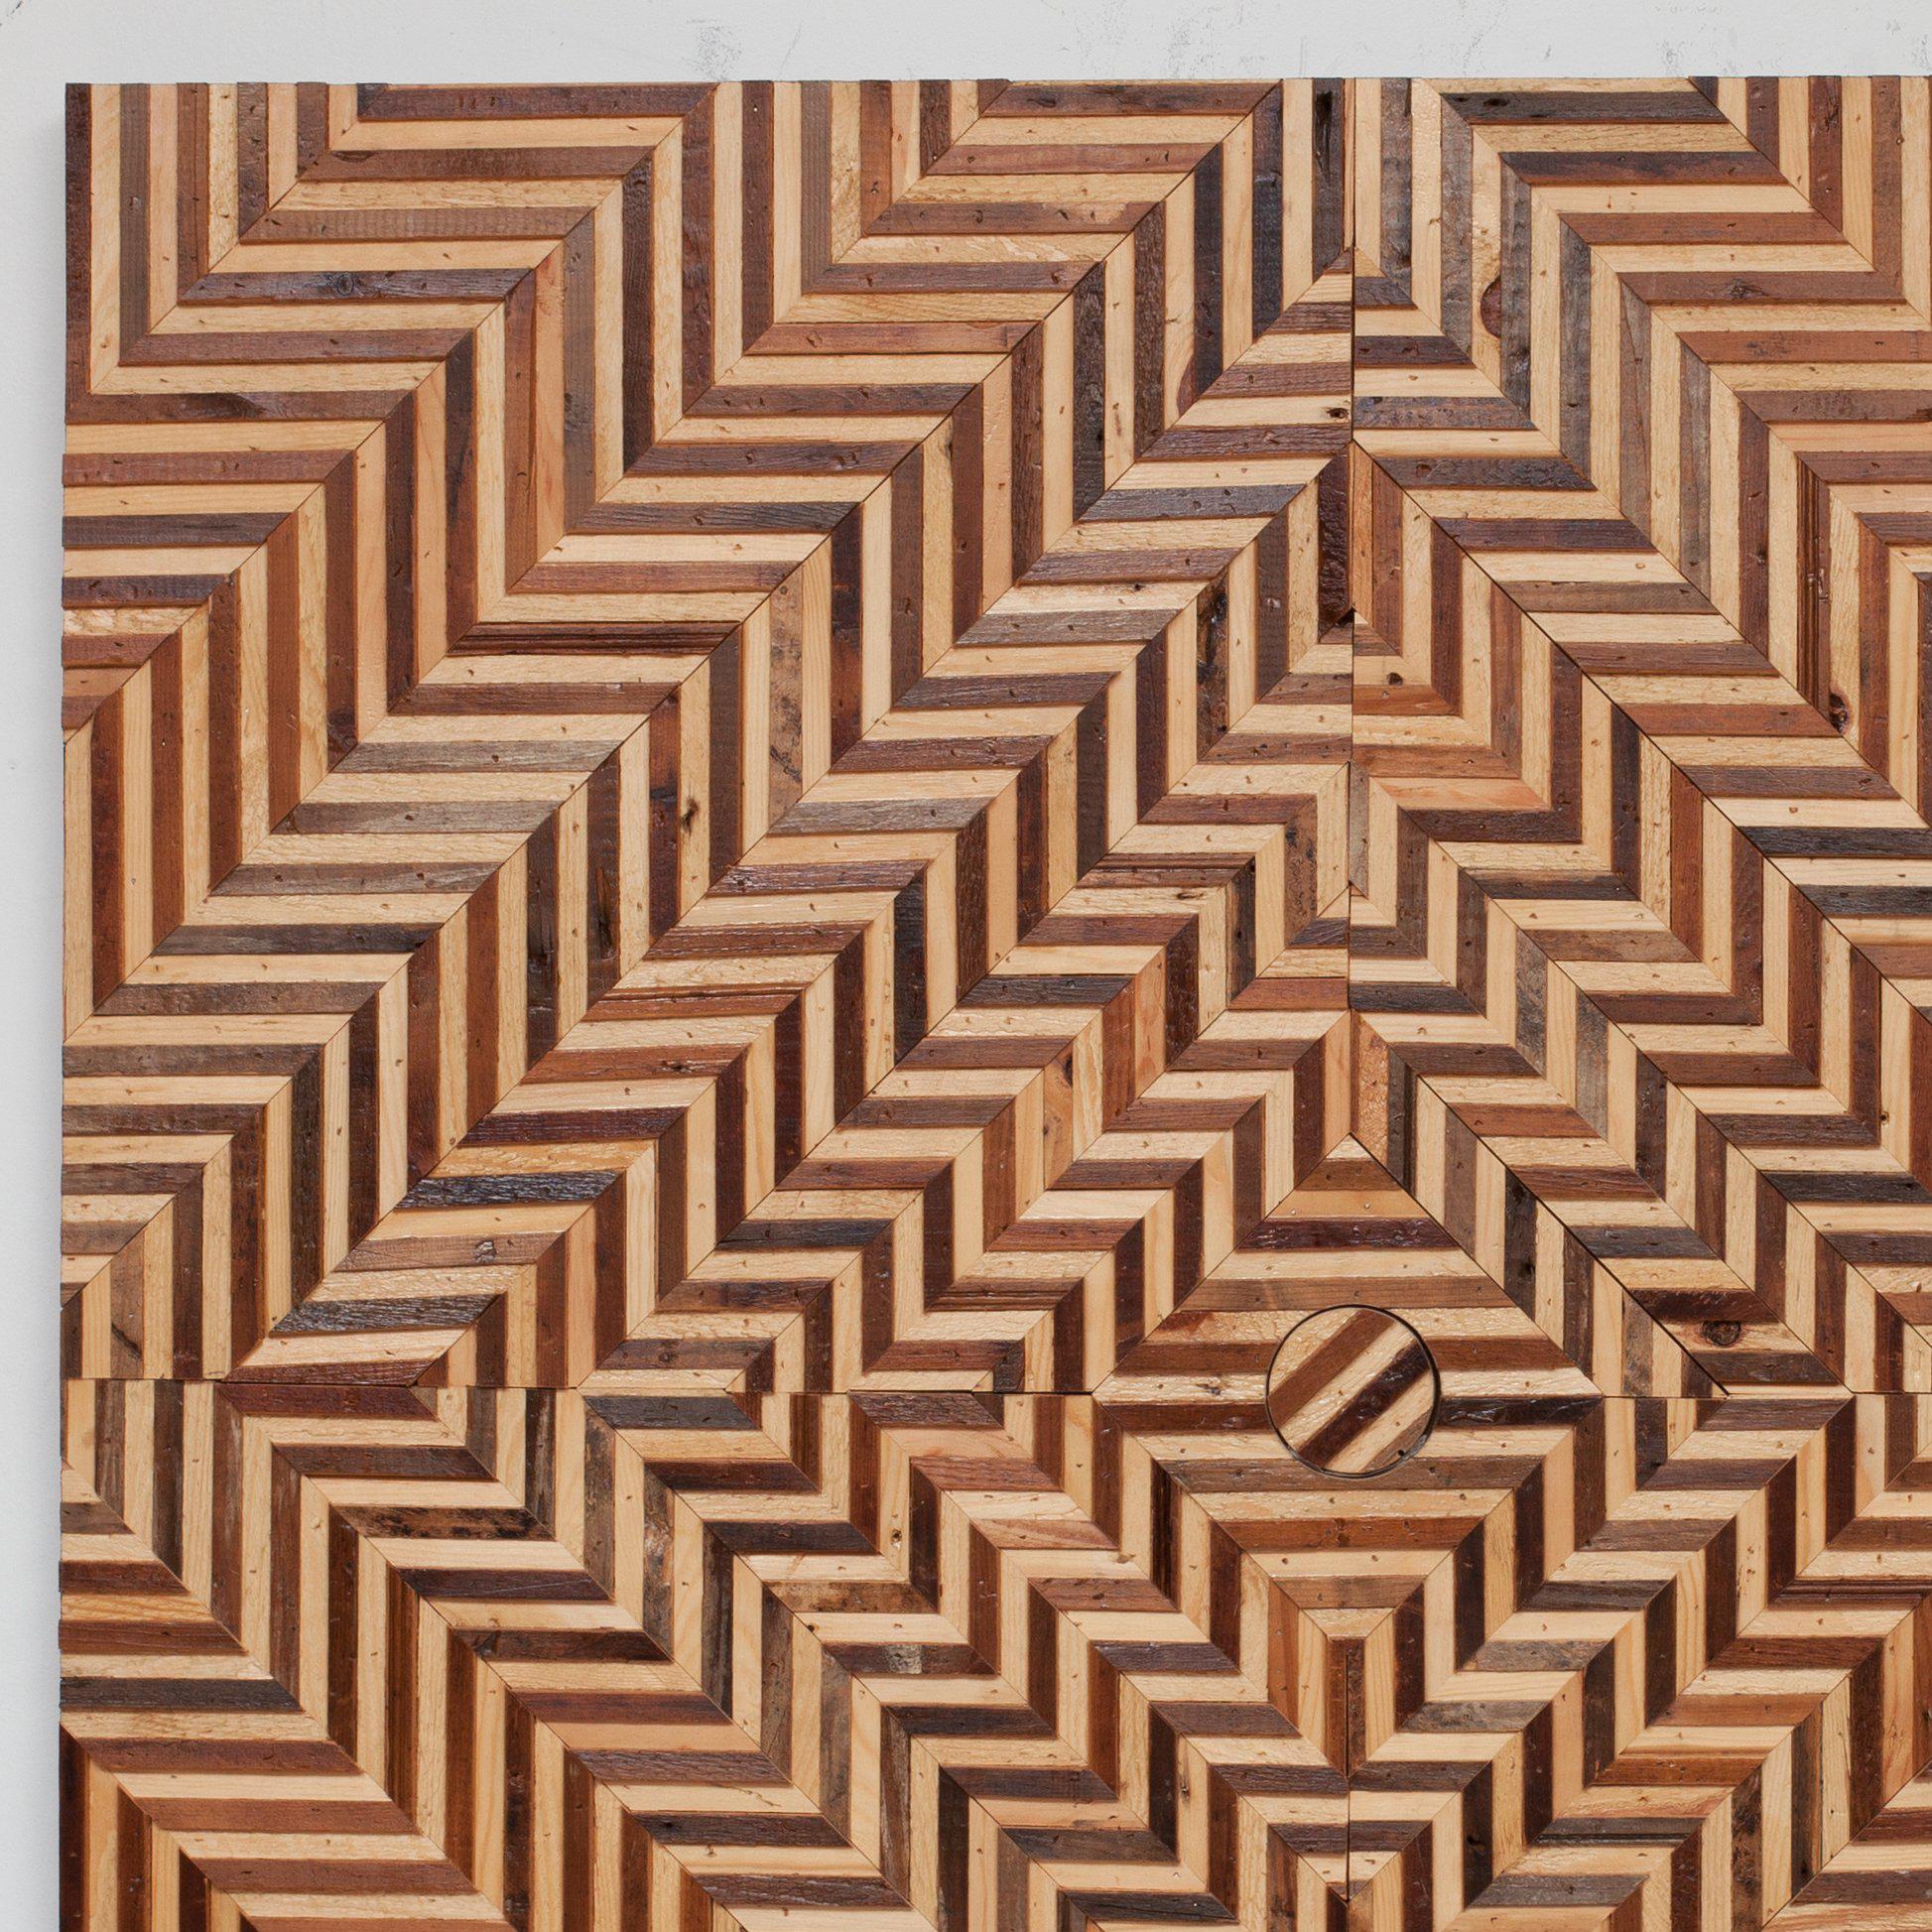 Op Art Series II
Reclaimed wood and pigment on panel, 45 in. x 45.5 in.

Wildeman's work hangs on the walls of the Rockefeller family private offices, and is sought after by private collectors and commercial venues internationally. 
Wildeman is the